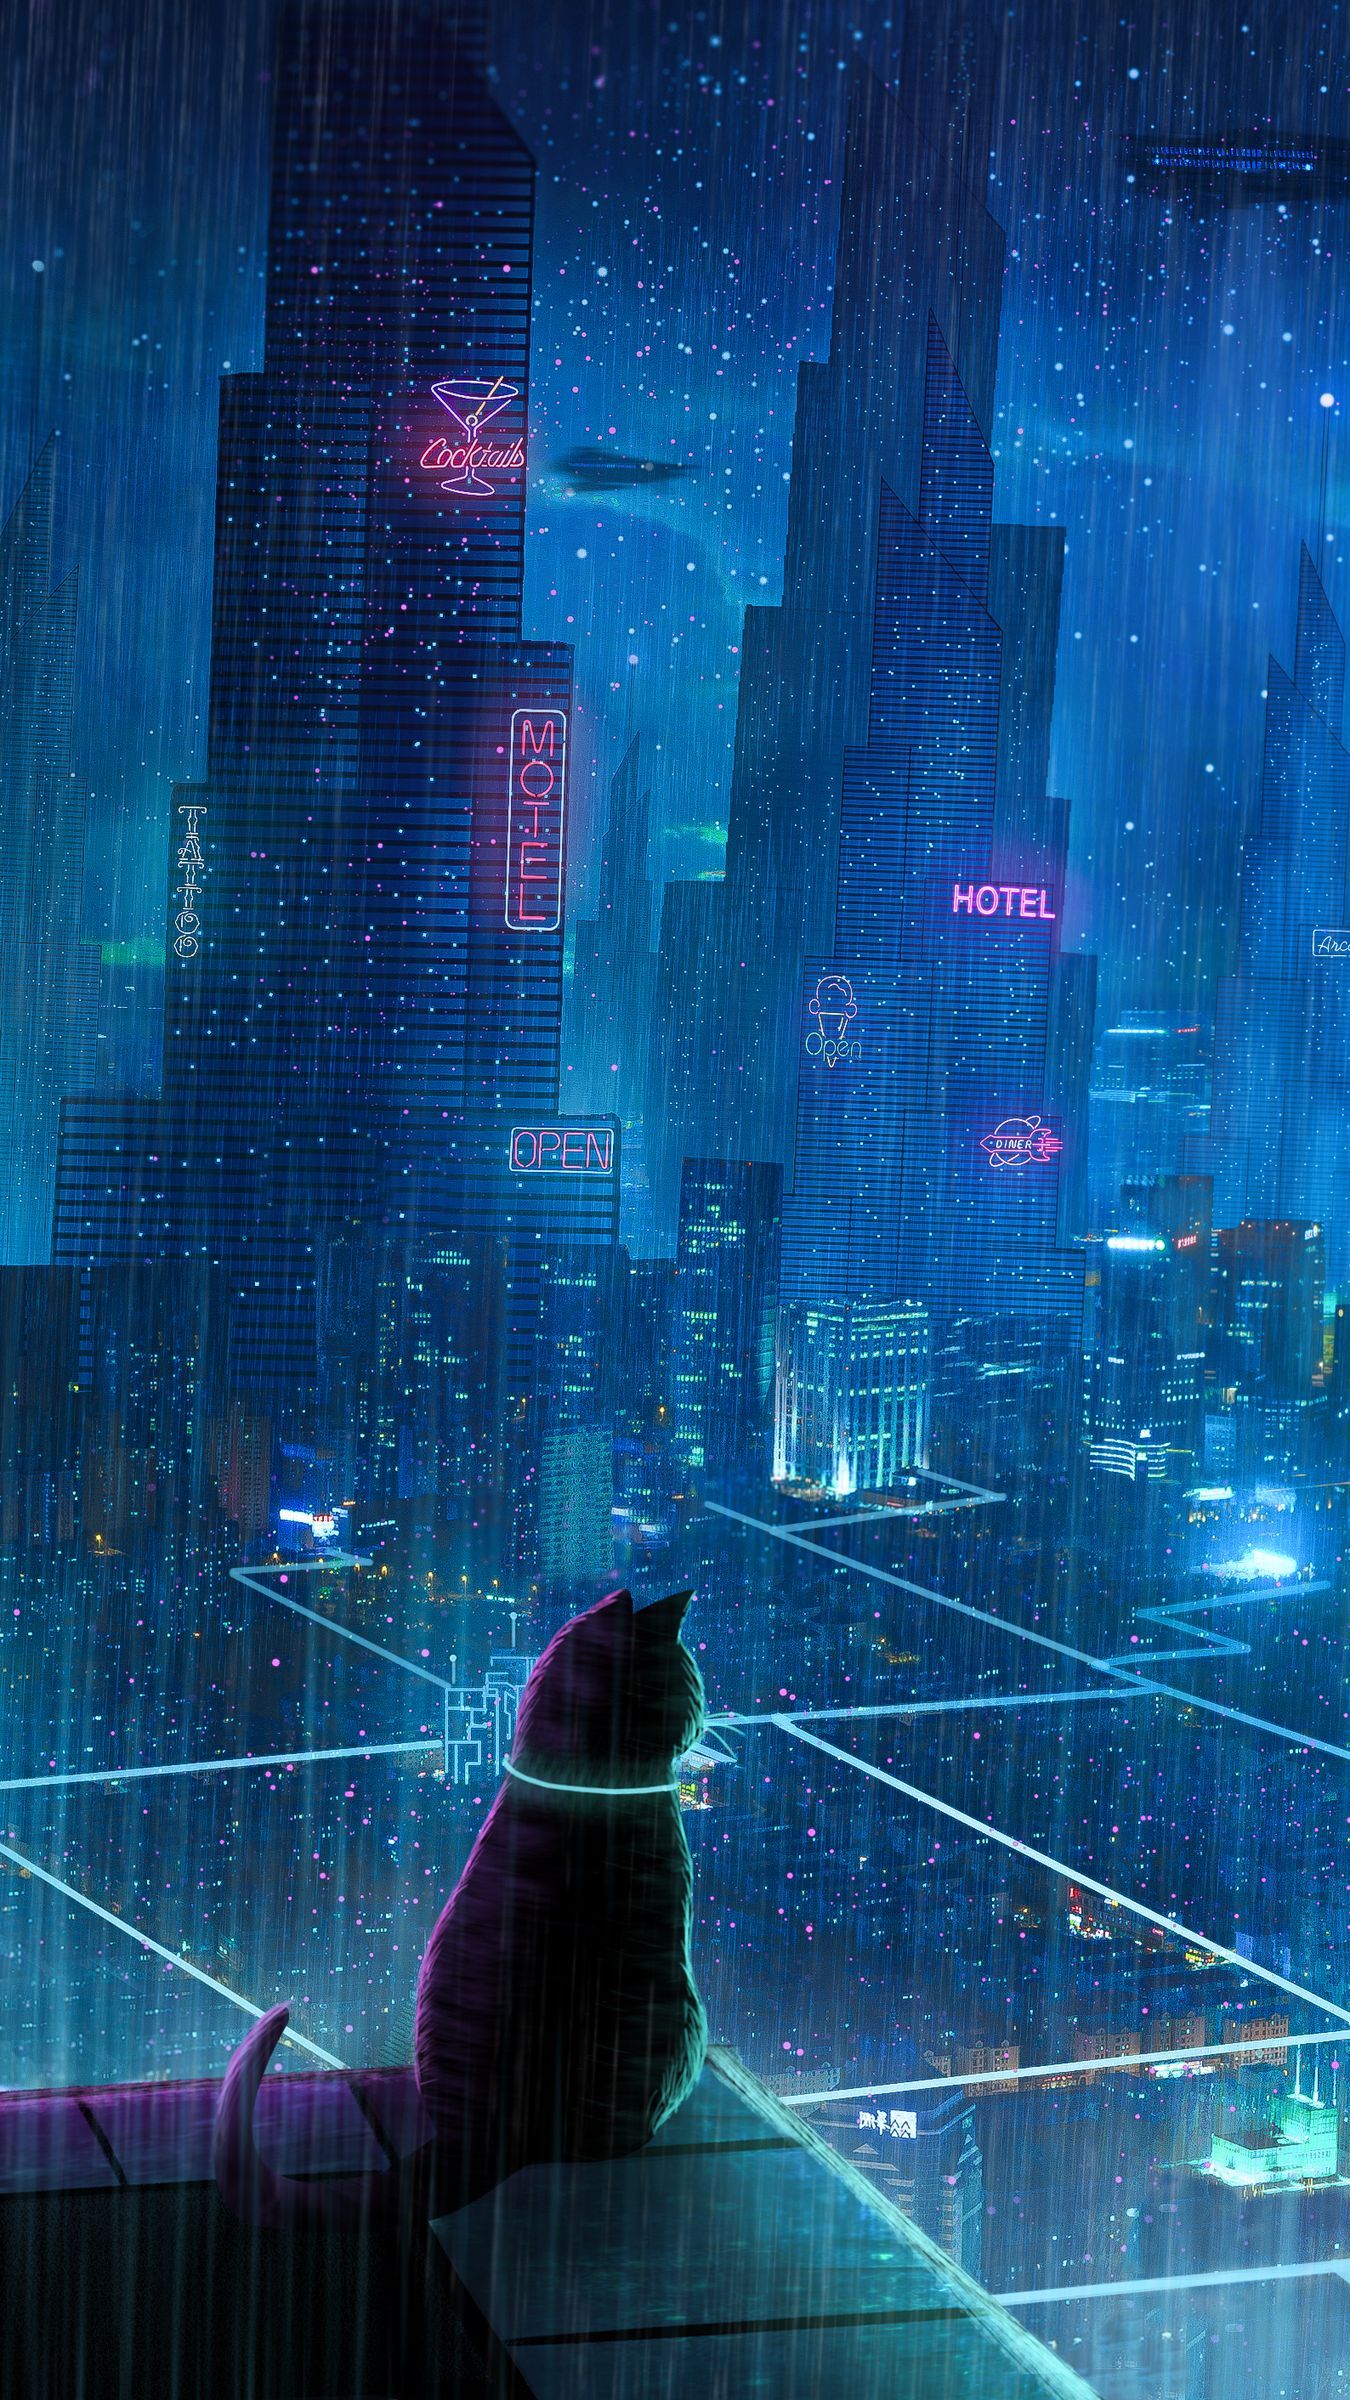 A cat sitting on the edge of building looking out at city - Cyberpunk, city